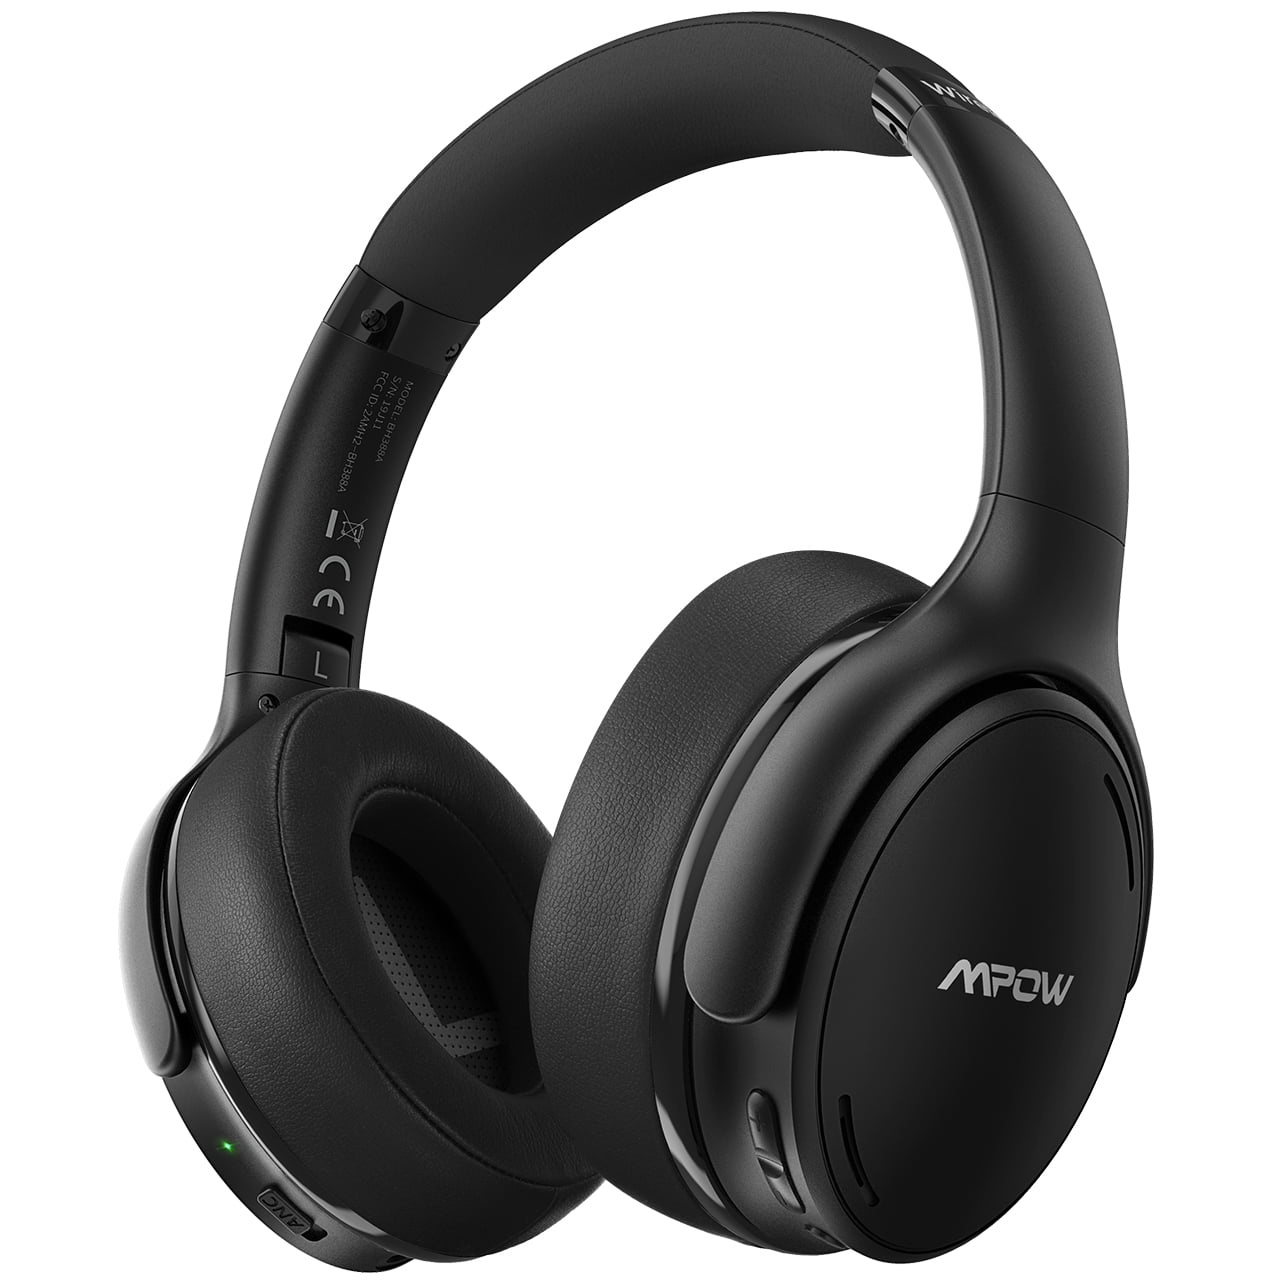 FD1 P9 Pro Max Wireless Headphones With Active Noise Cancellation